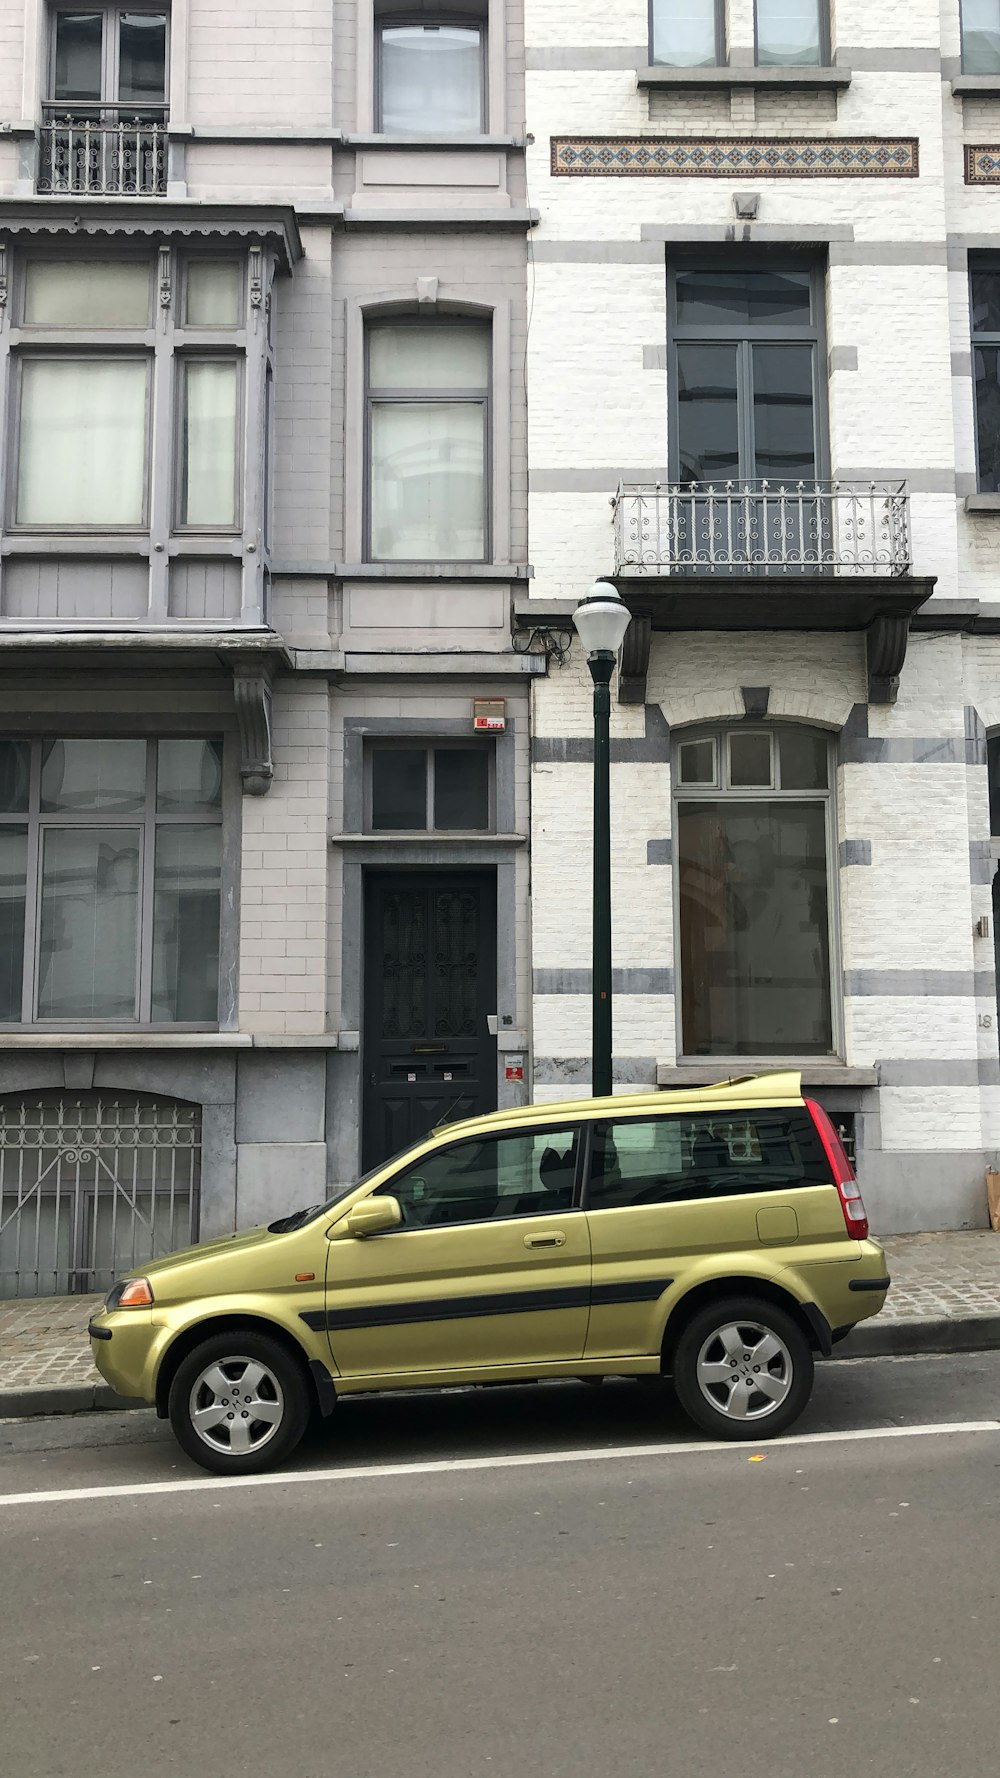 yellow 3 door hatchback parked beside gray concrete building during daytime